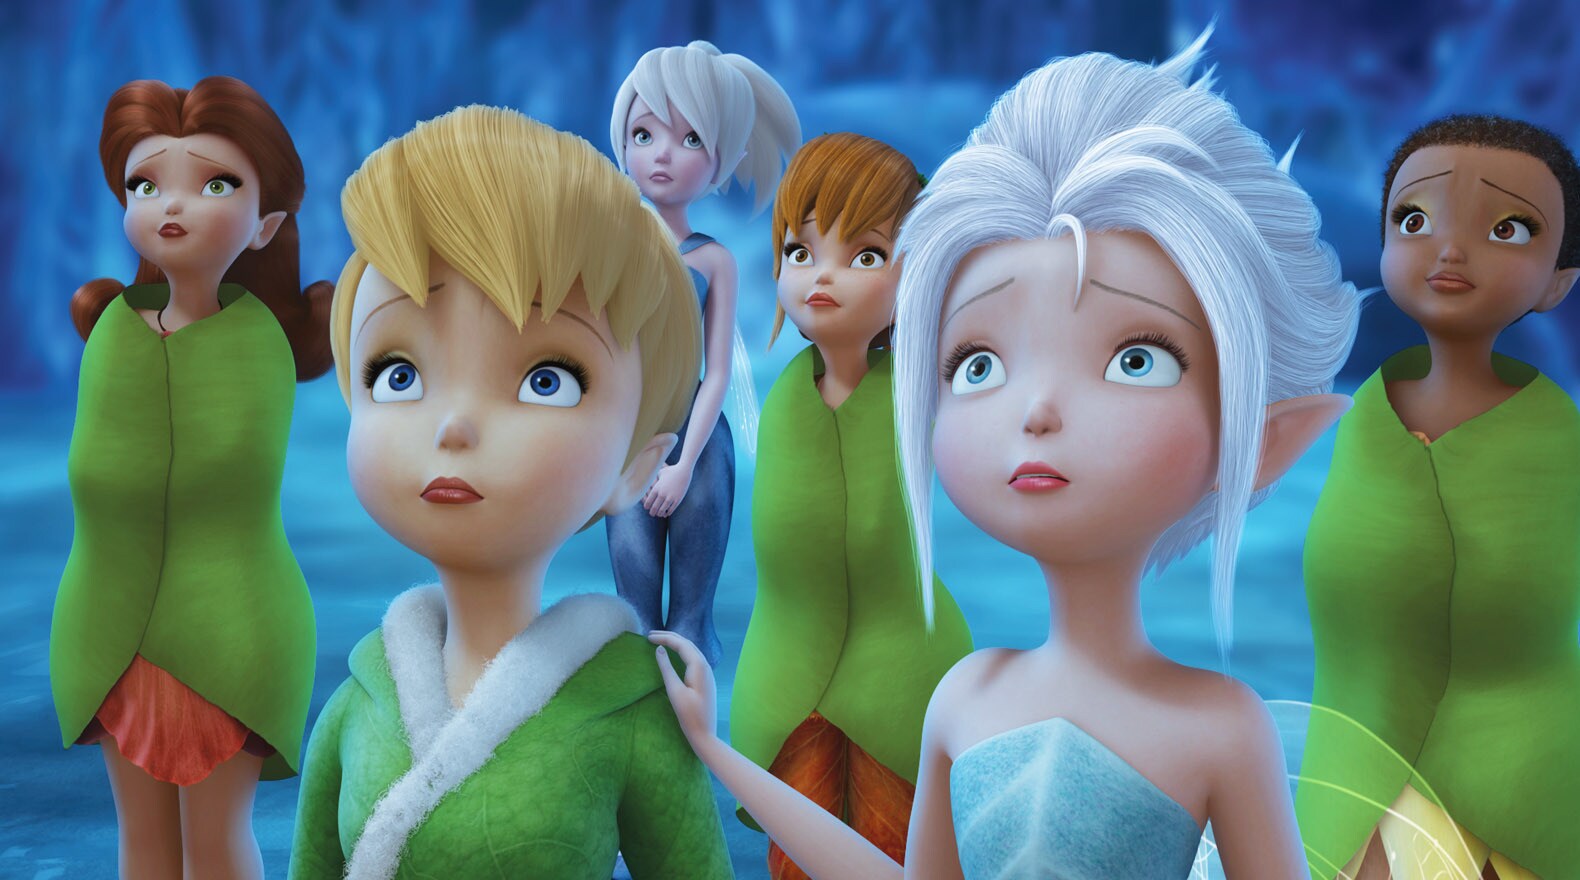 Tink and Peri hope that the freeze has spared the Pixie Dust Tree.